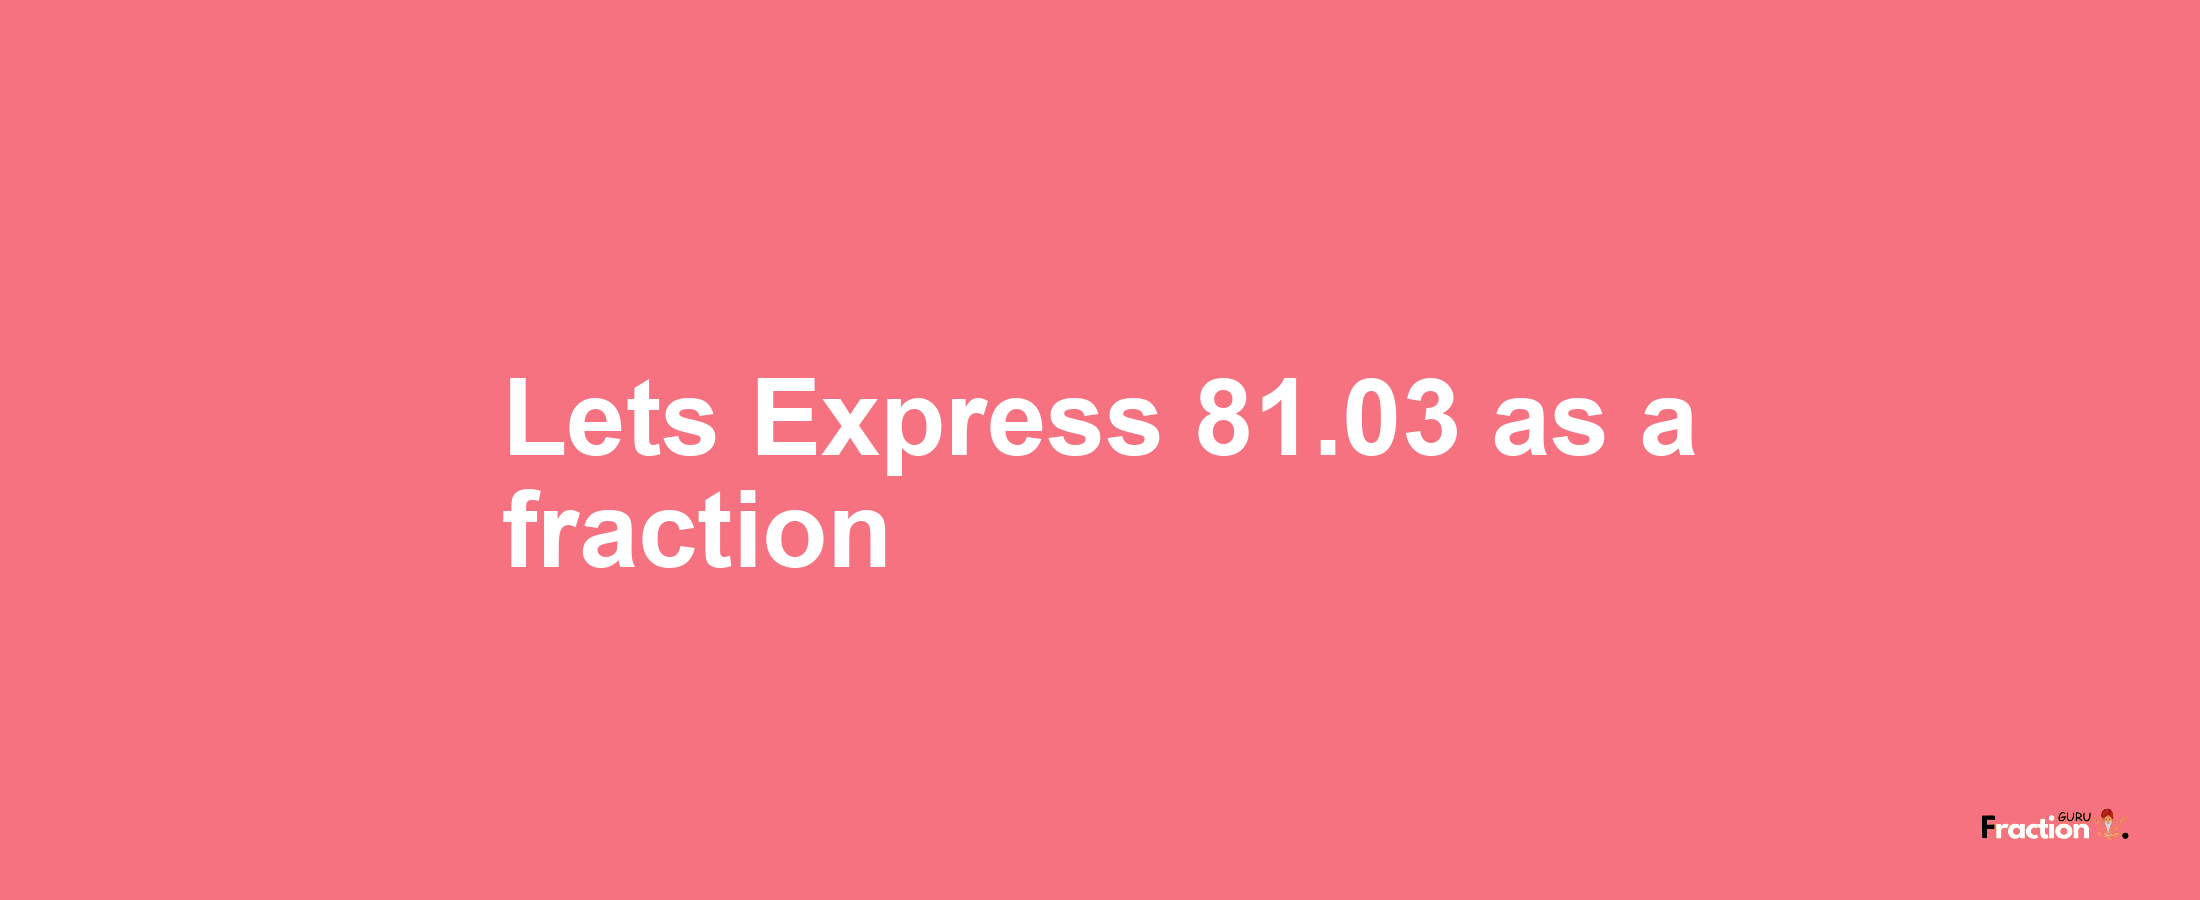 Lets Express 81.03 as afraction